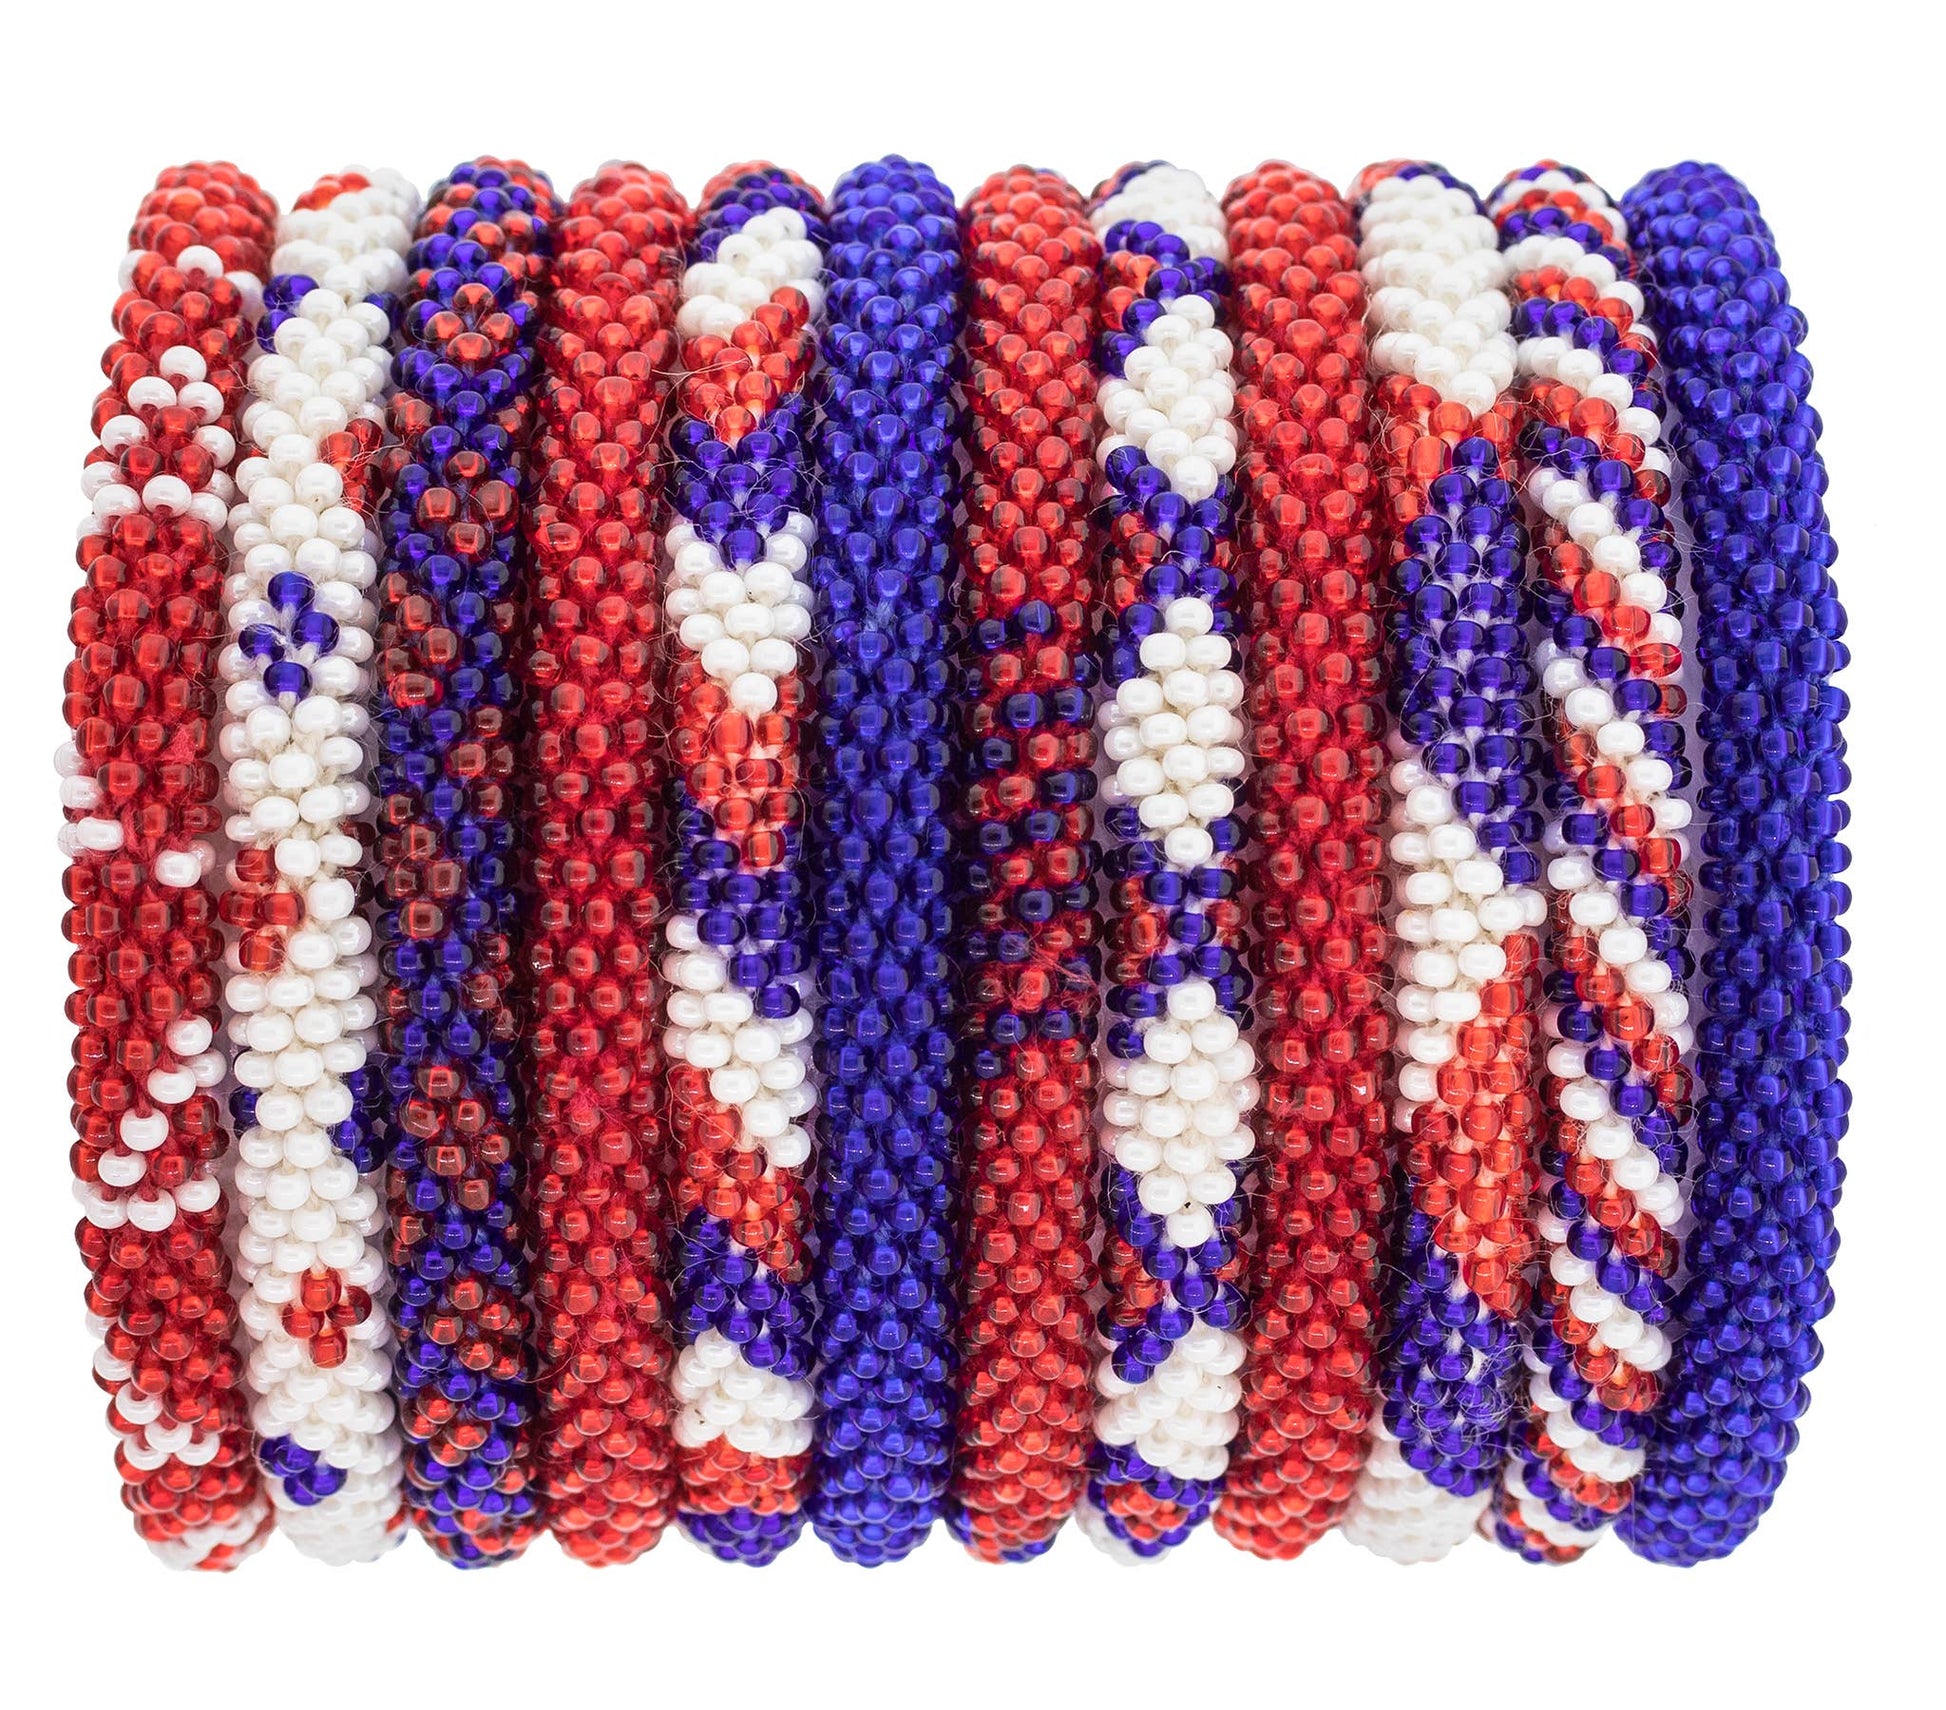 Roll-On® Bracelet Red, White, and Blue Bracelets Aid Through Trade   